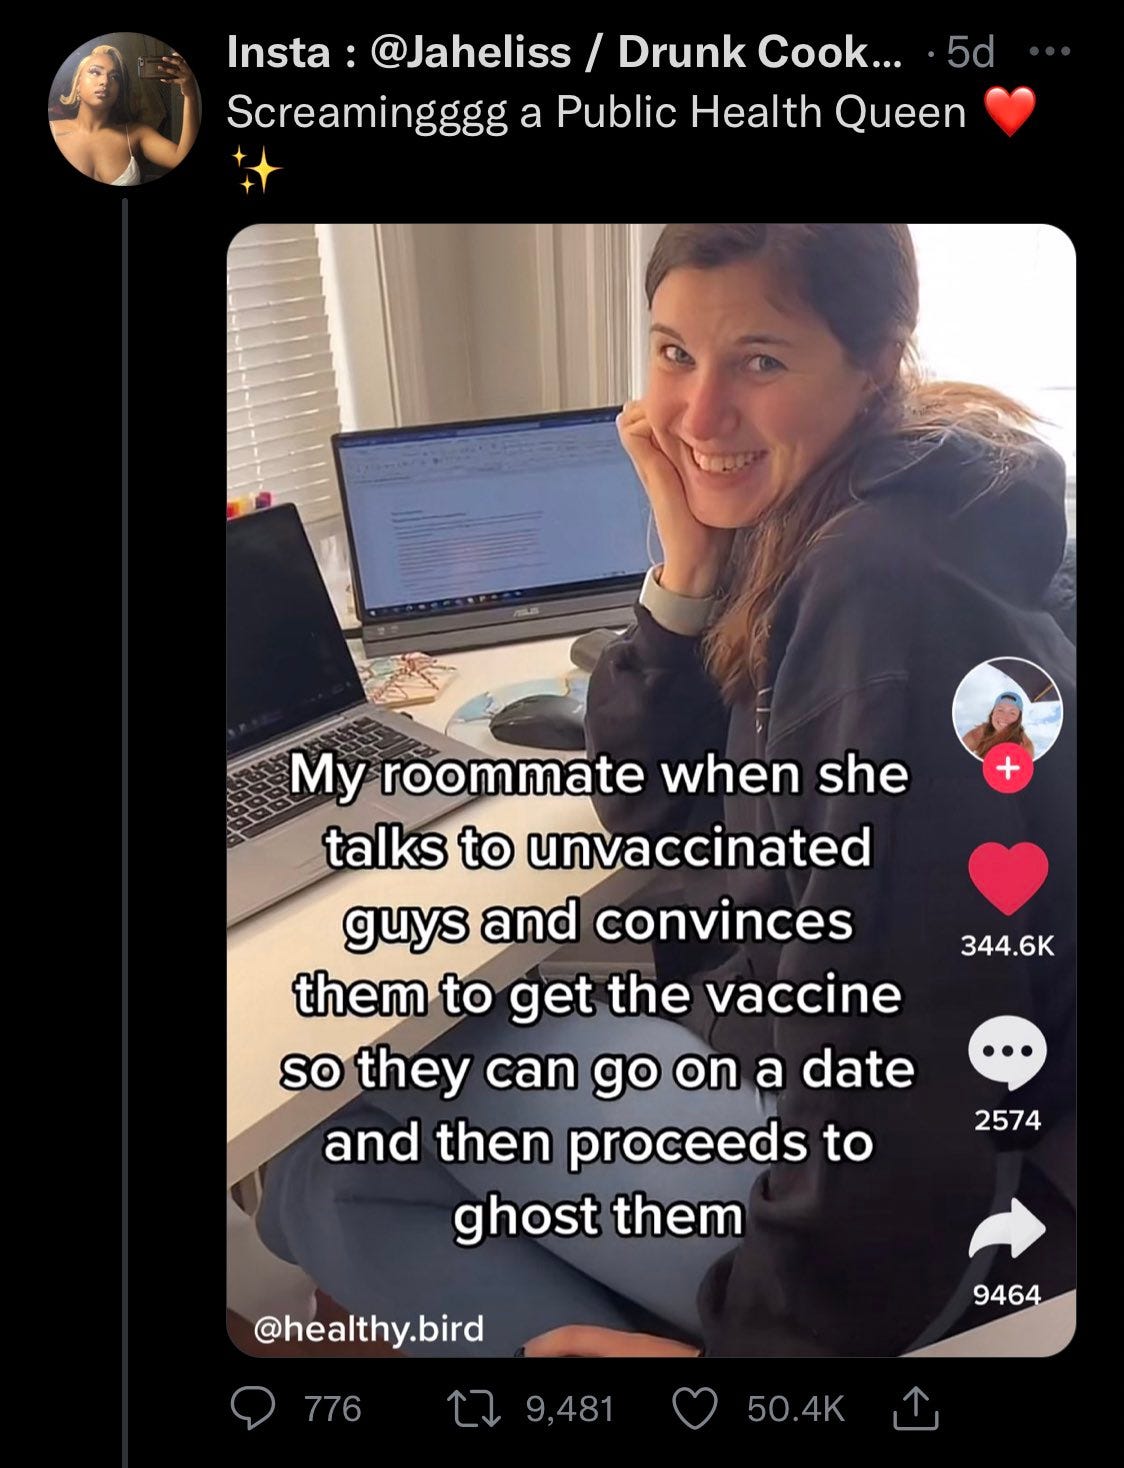 Screenshot (1 of 2) of tweet by @jaheliss that attaches a screenshot of a woman in front of a computer with the text: “My roommate when she talks to unvaccinated guys and convinces them to get the vaccine so they can go on a date and then proceeds to ghost them”